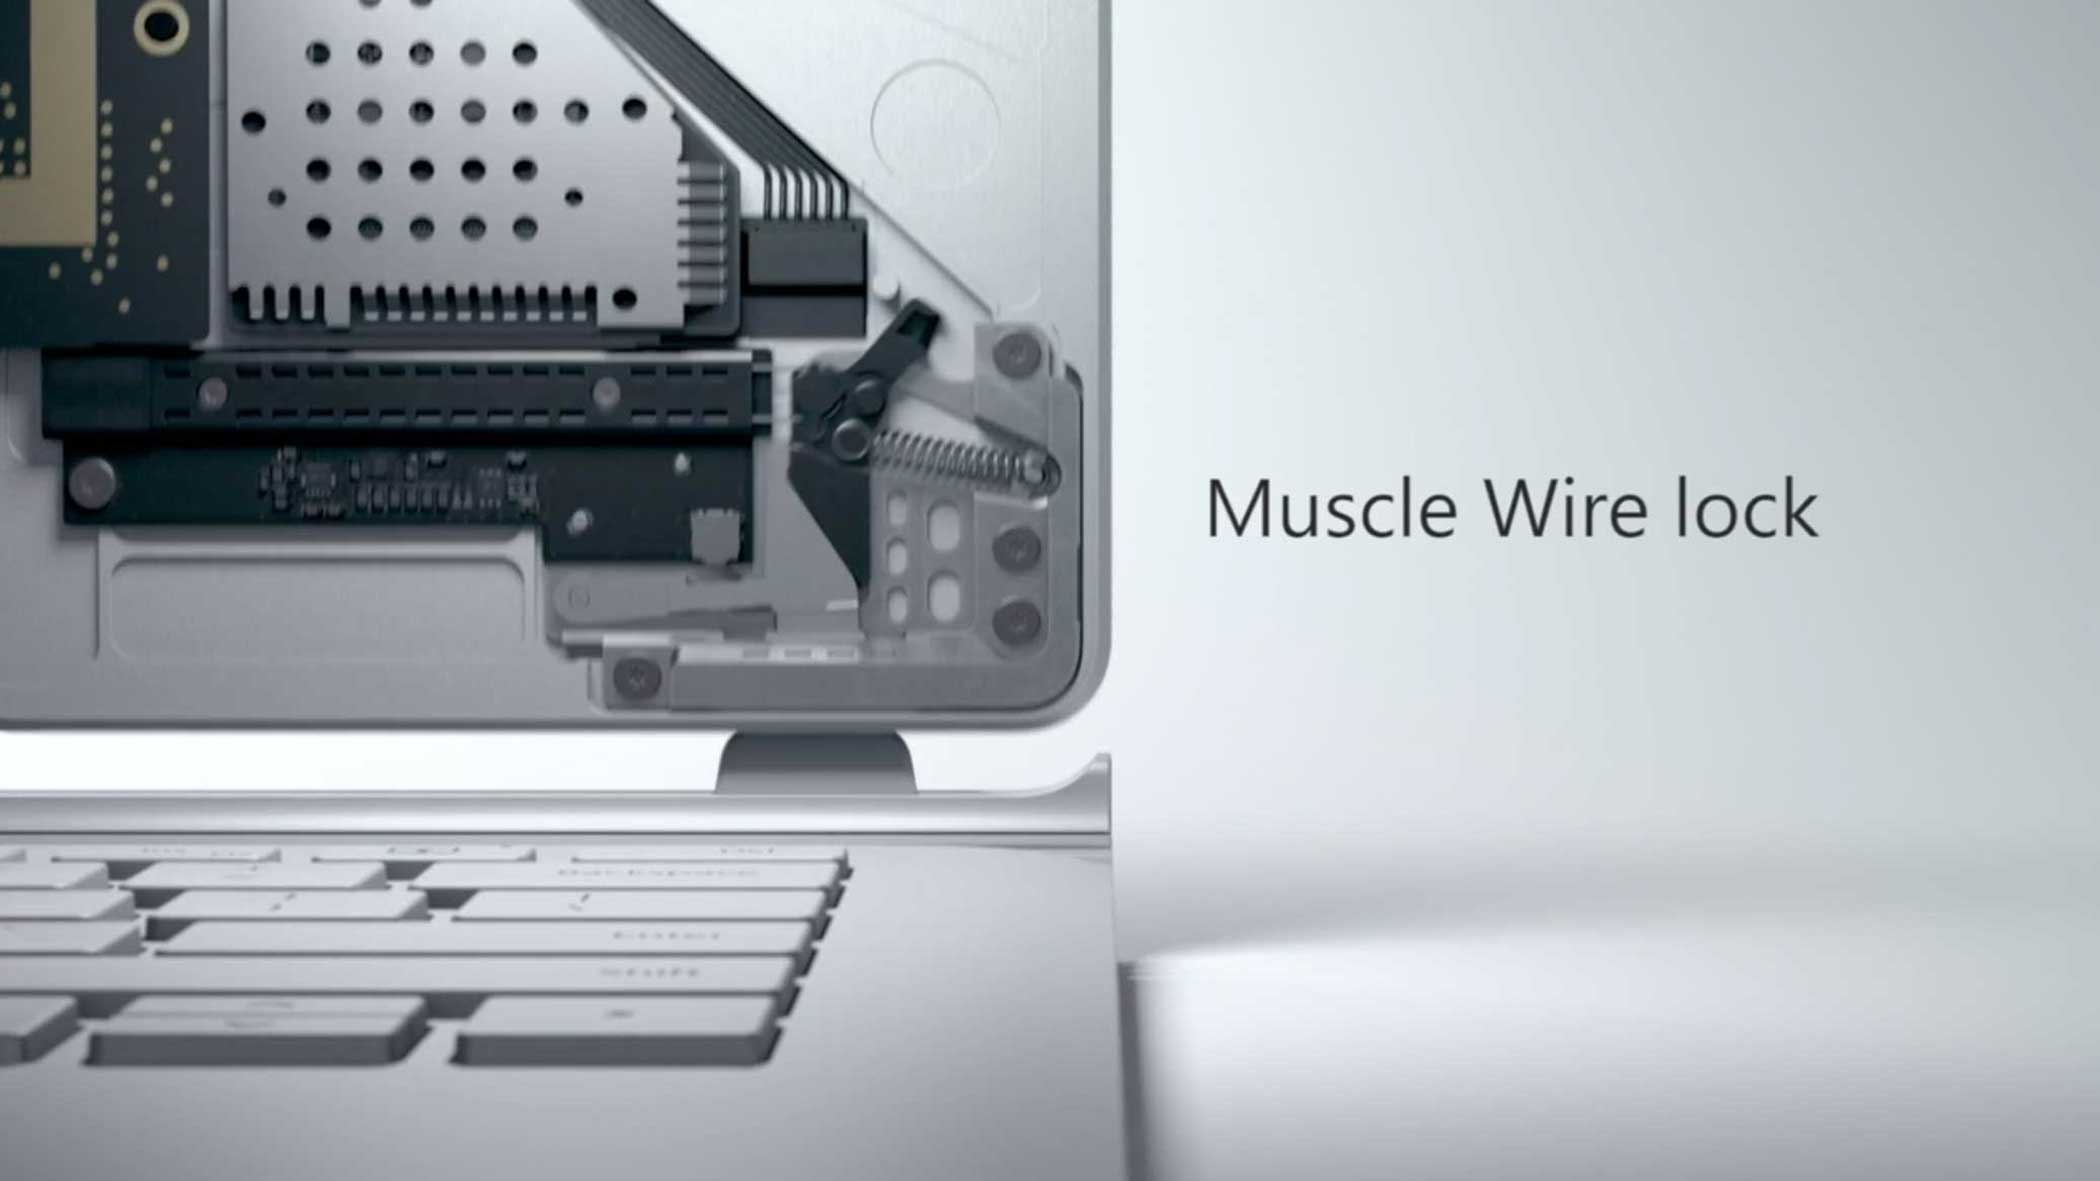 Made possible through Microsoft's Muscle Wire lock.